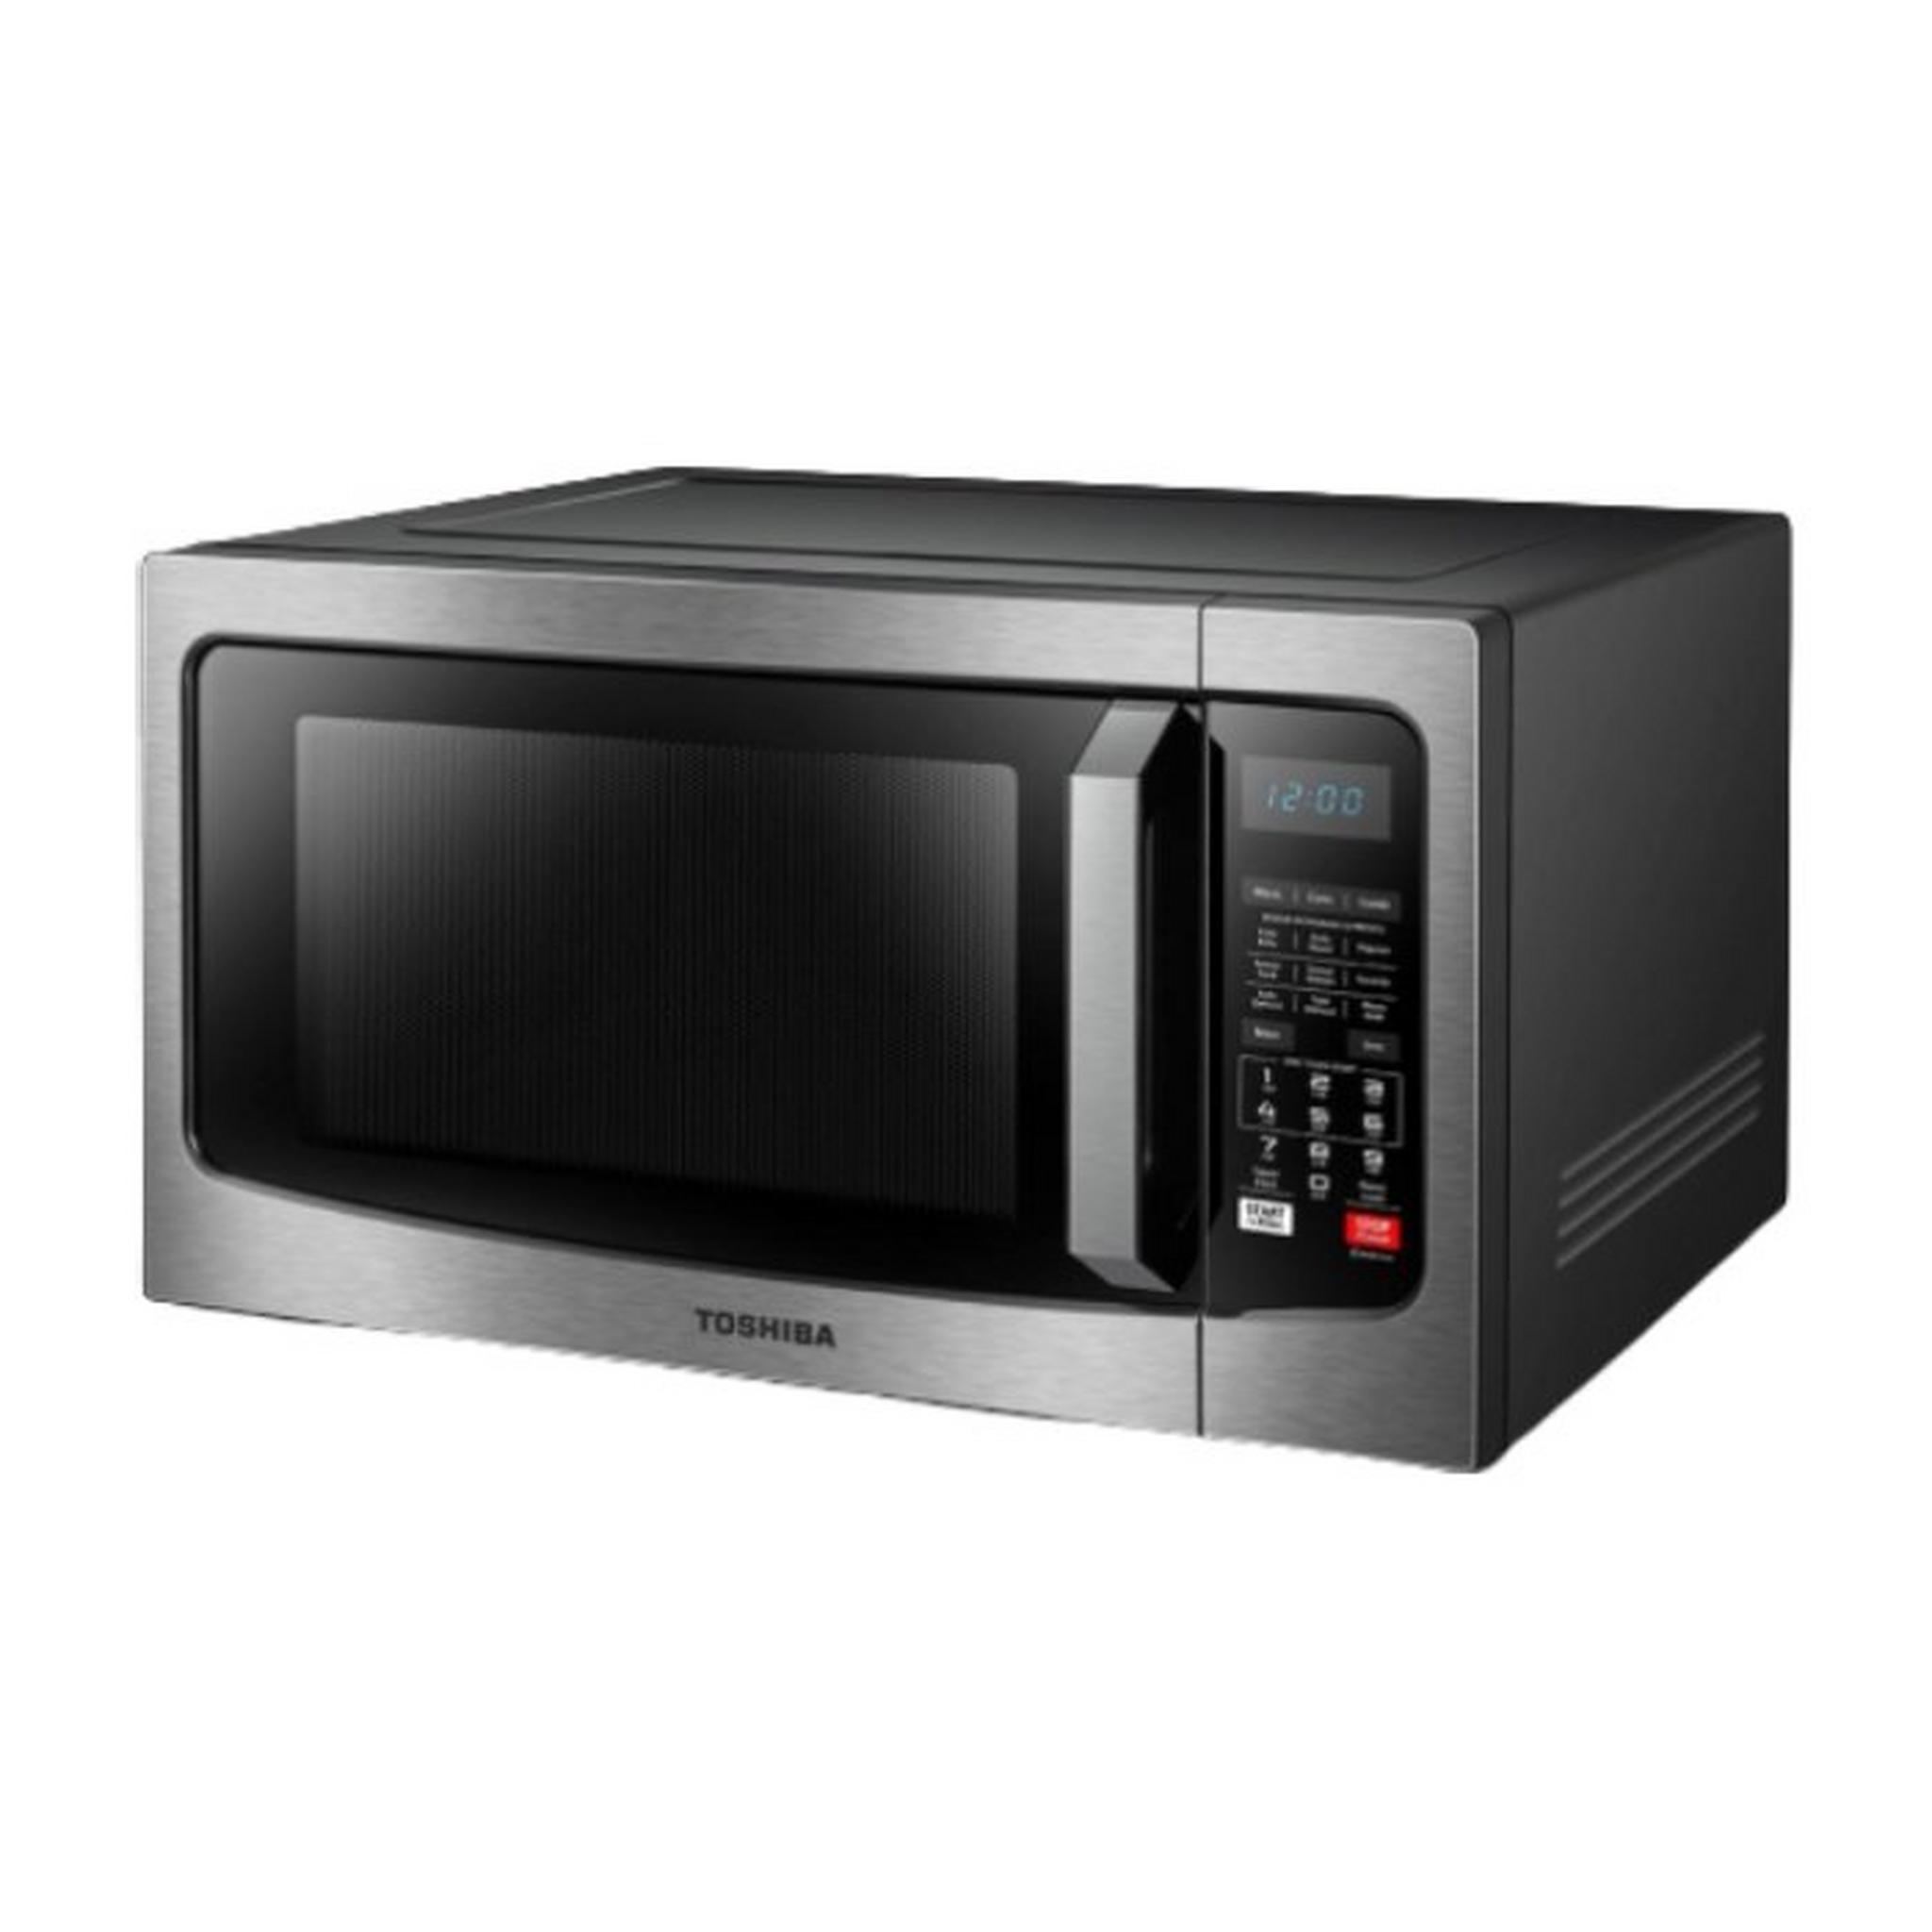 Toshiba 42 L Convection Microwave Oven (ML-EC42S)